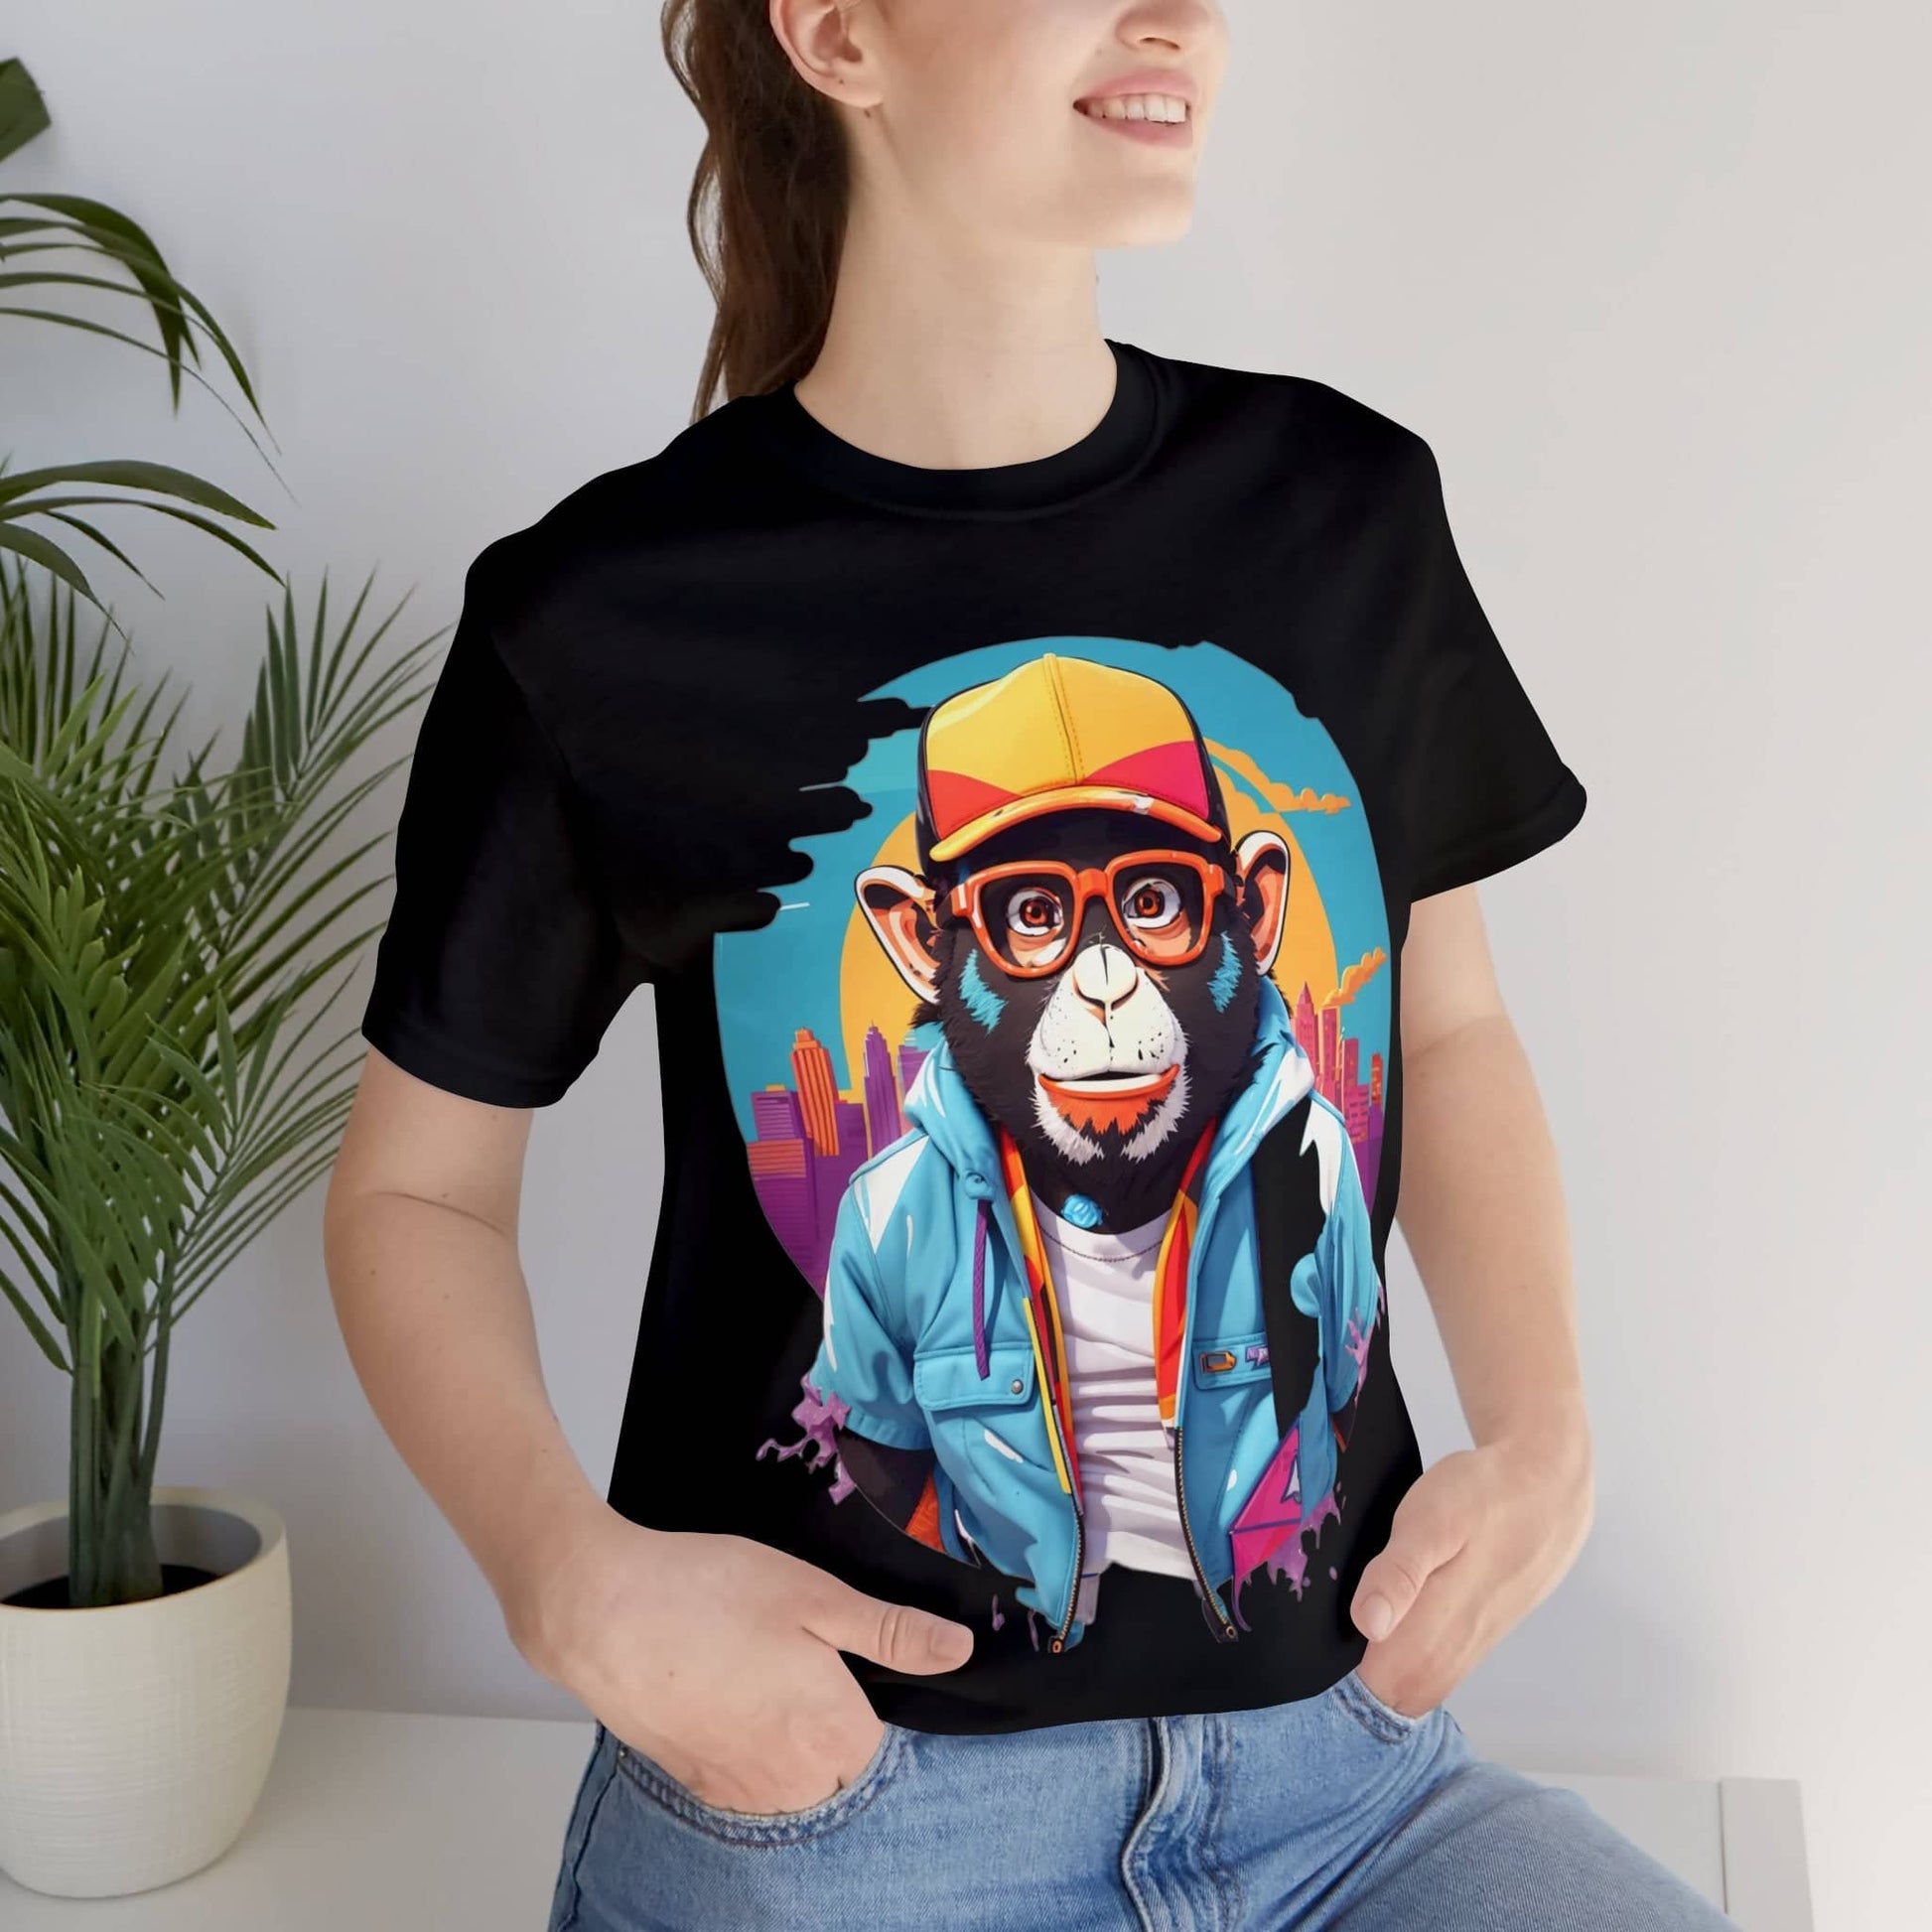 "Limited Edition Graffiti Gorilla: Urban Hip-Hop Graphic Tee for the Trendy Streetwear Connoisseur" T-Shirt Bigger Than Life Black S 